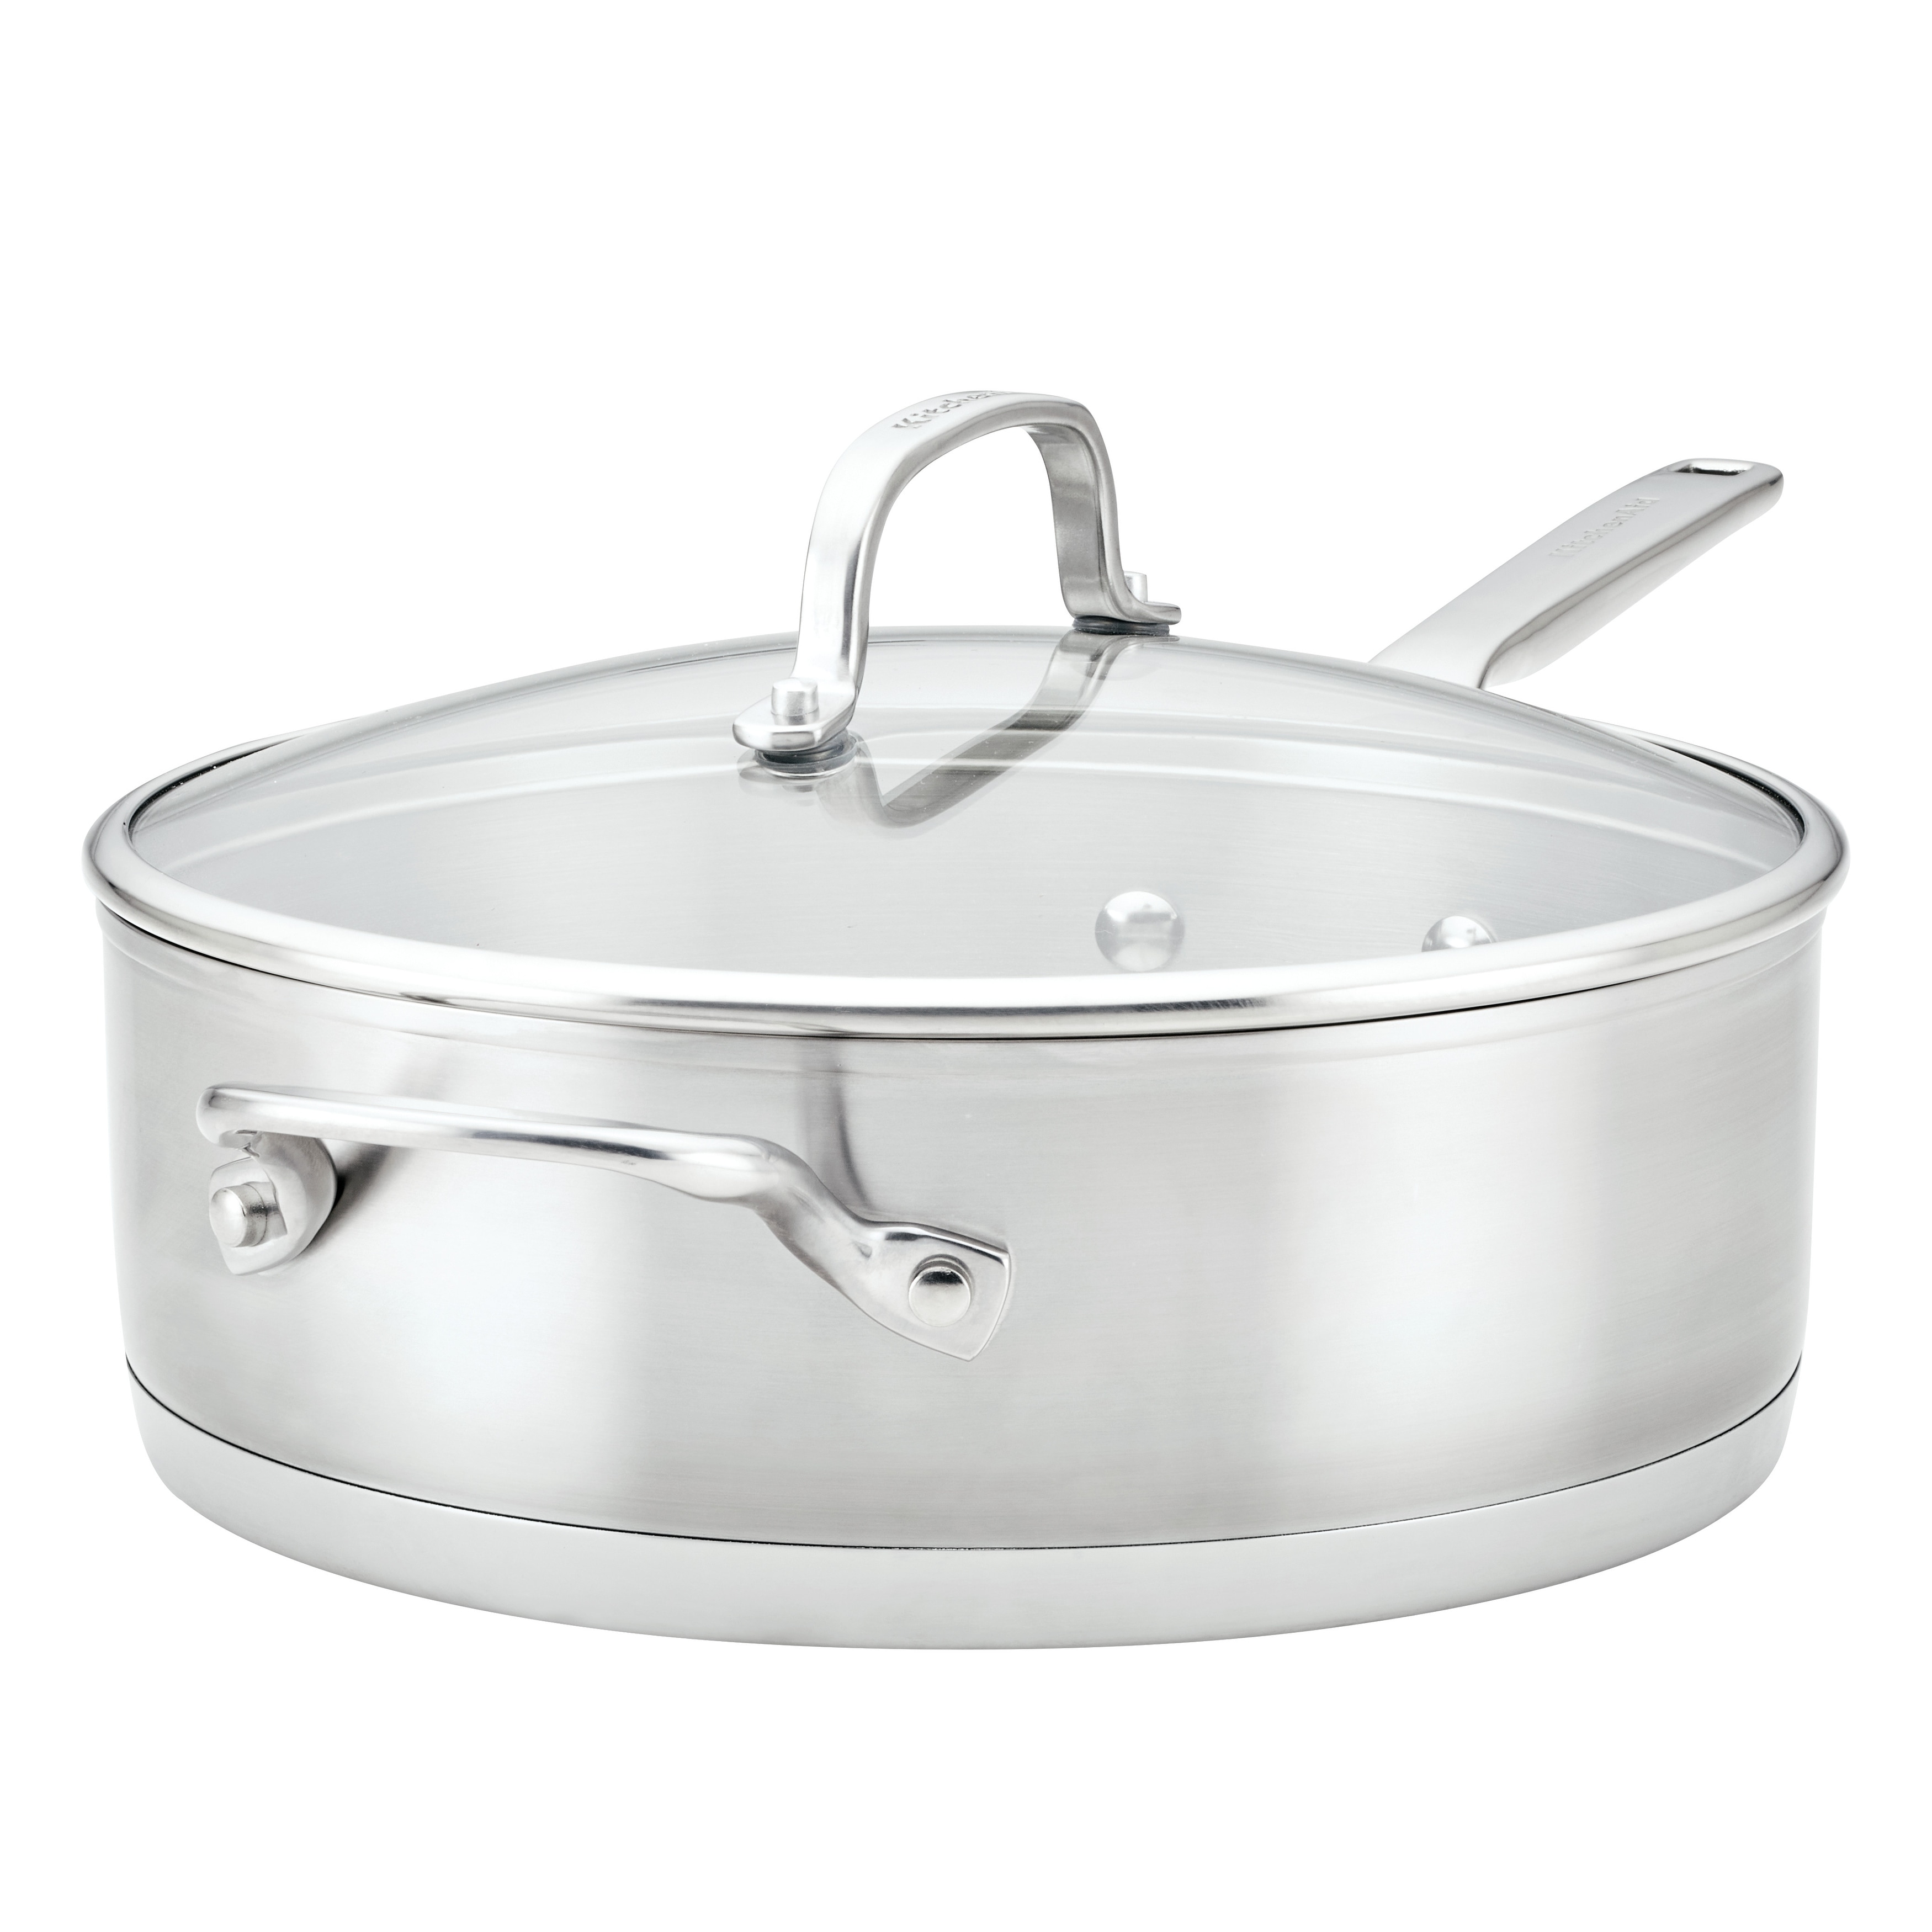 https://ak1.ostkcdn.com/images/products/is/images/direct/31341732693613254e6d36af50f24cc173da884c/KitchenAid-3-Ply-Base-Stainless-Steel-Deep-Saute-Pan-with-Lid%2C-4.5qt.jpg